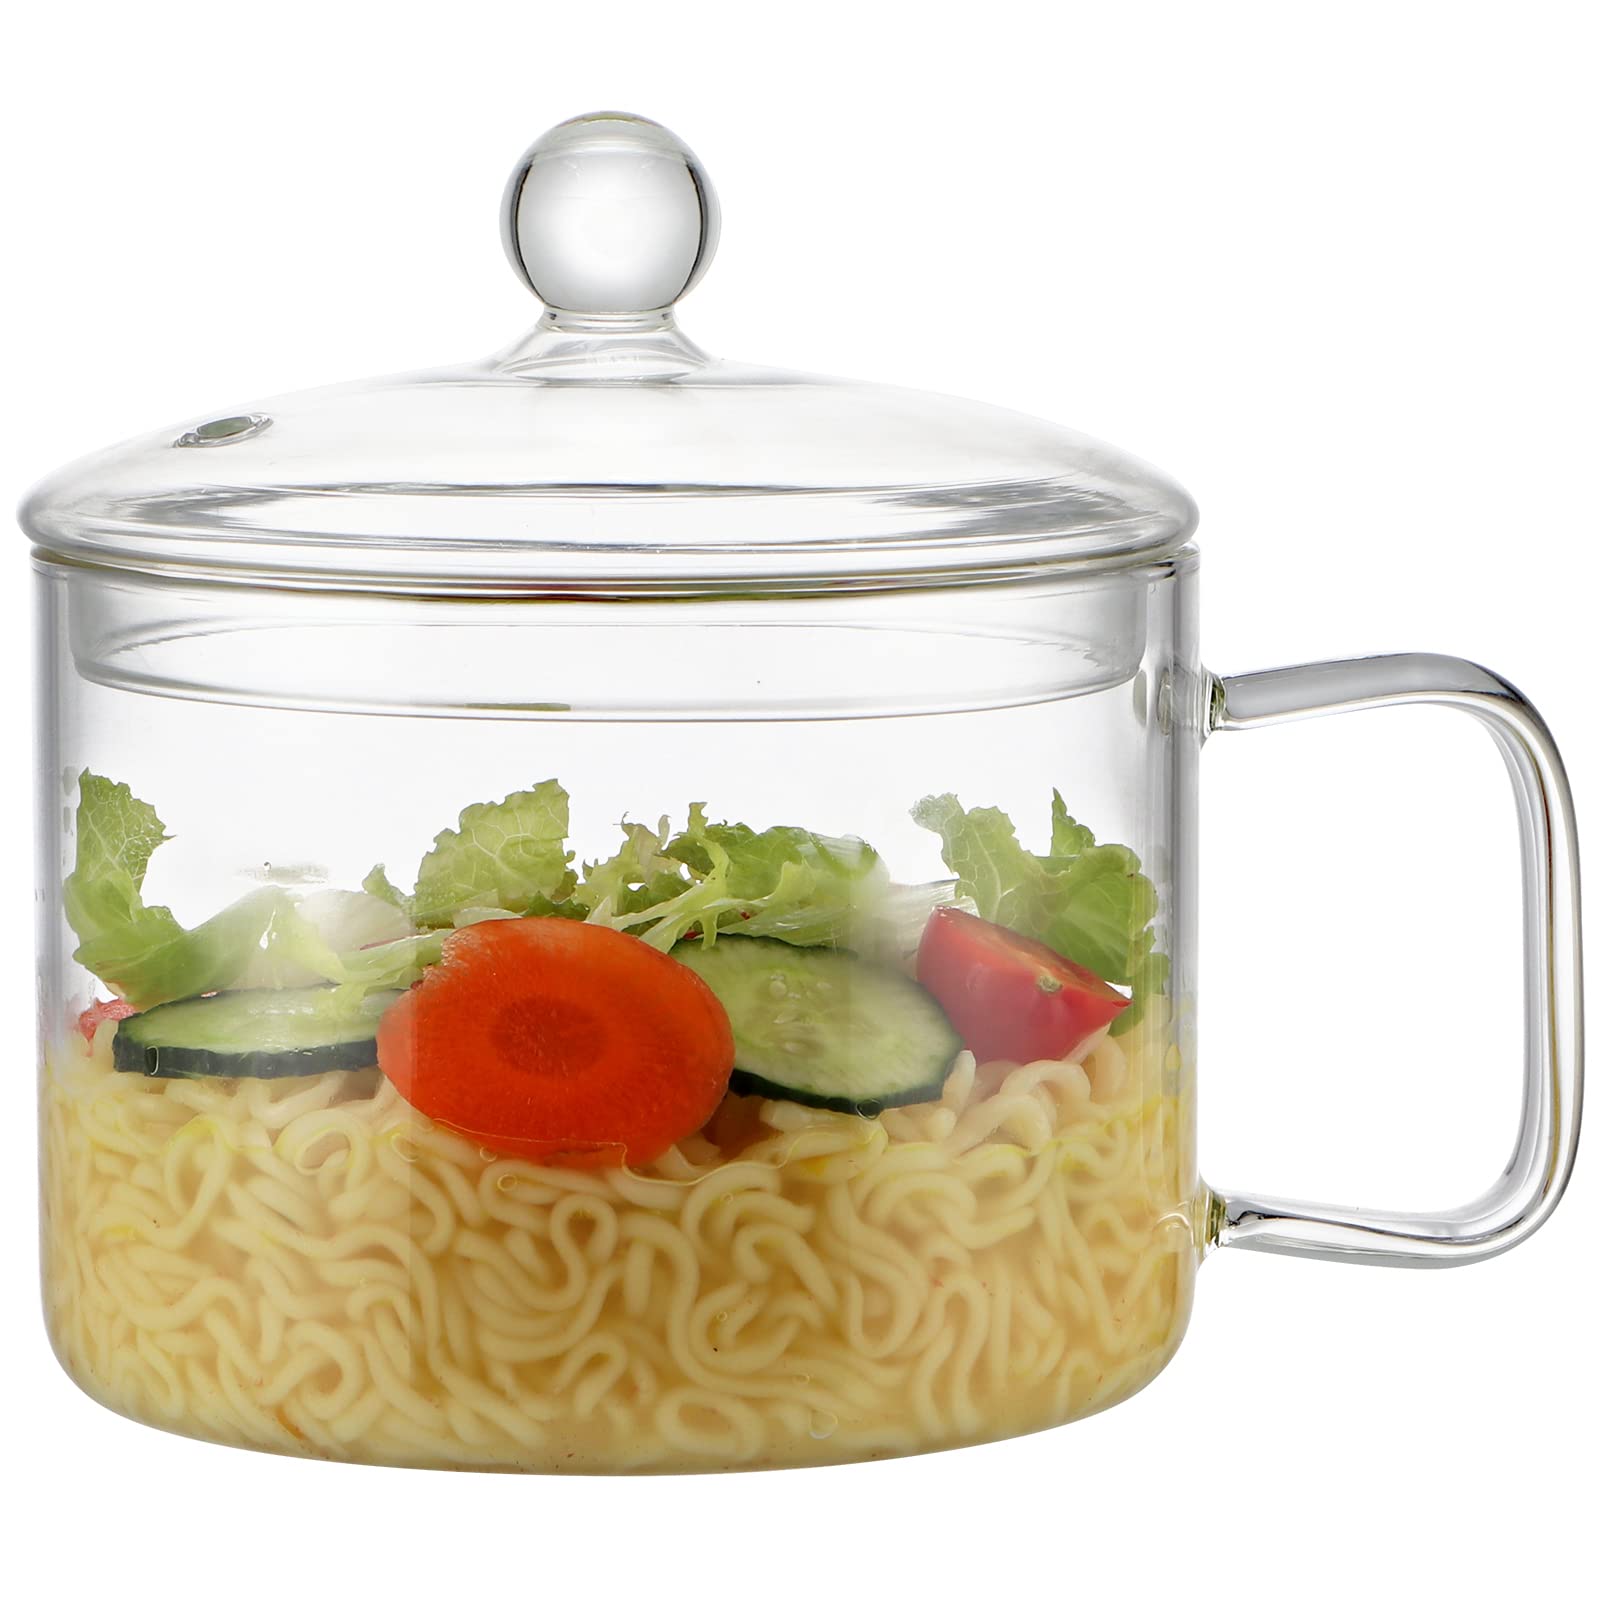 MDLUU Glass Soup Bowl with Handle 47 fl-oz, Heat Resistant Borosilicate Glass Saucepan with Lid, Glass Pot for Heating, Cooking Ramen, Pasta, Oatmeal